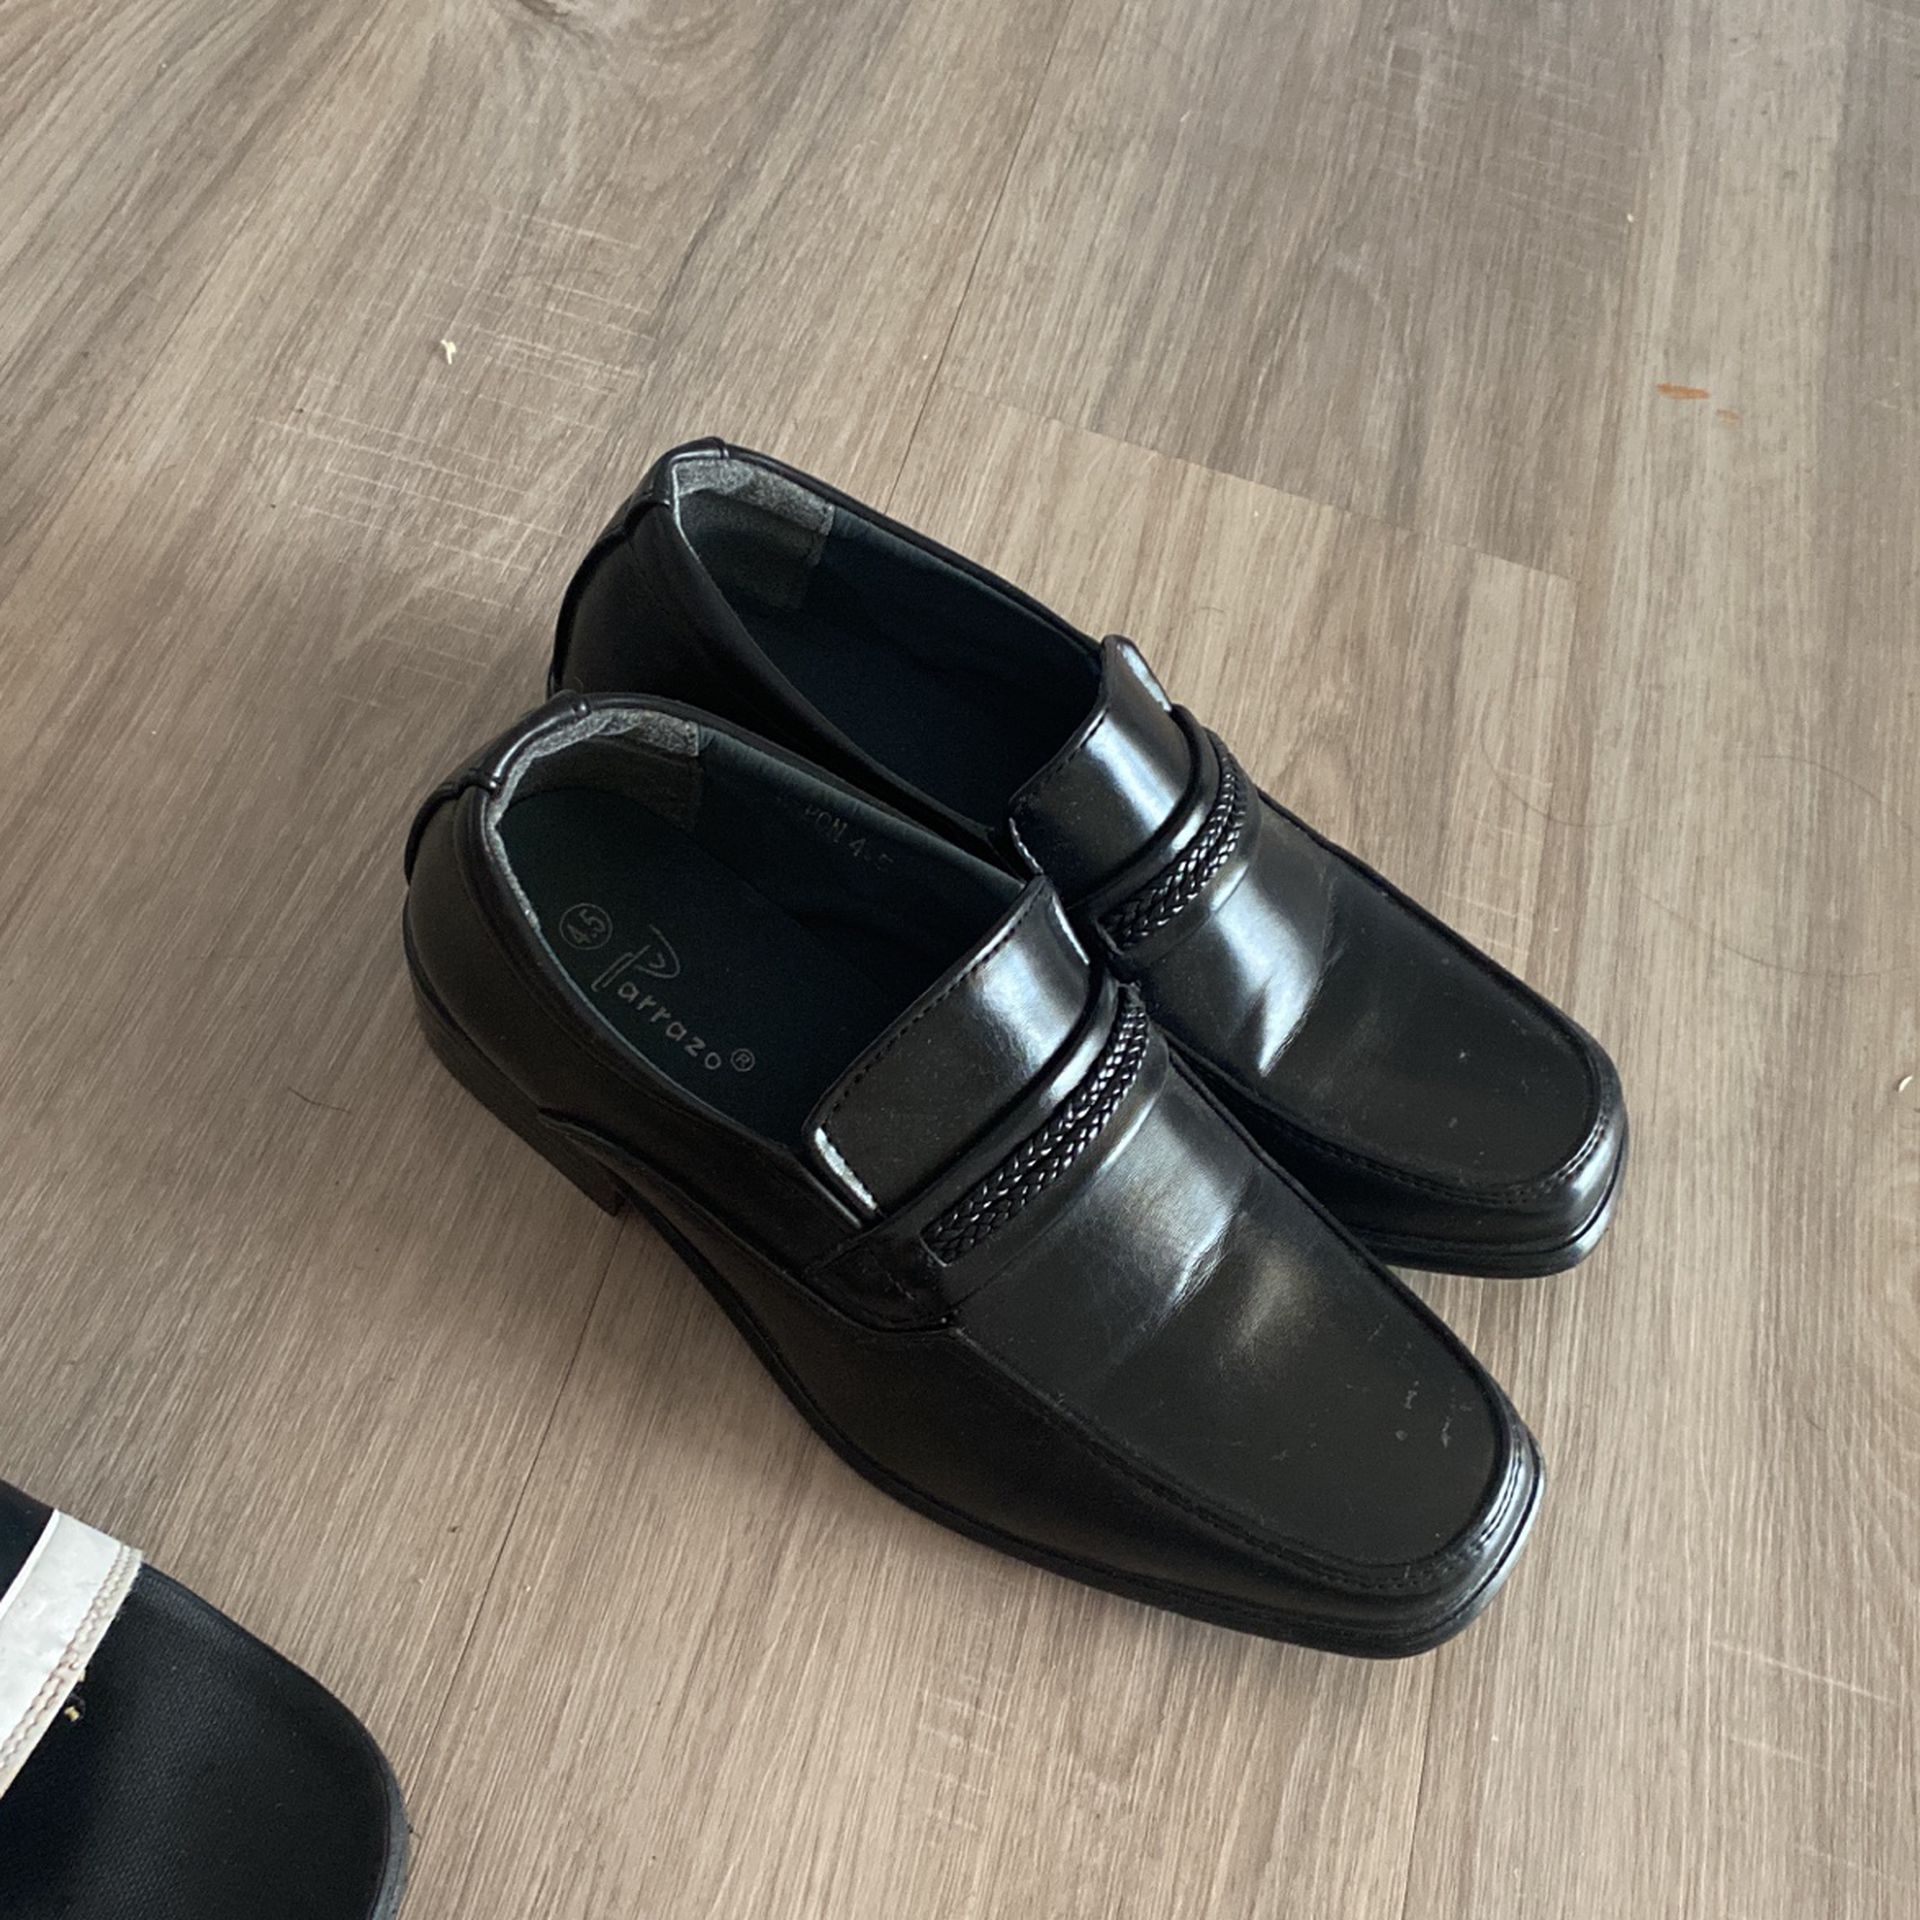 Black Shoes For Waiters 